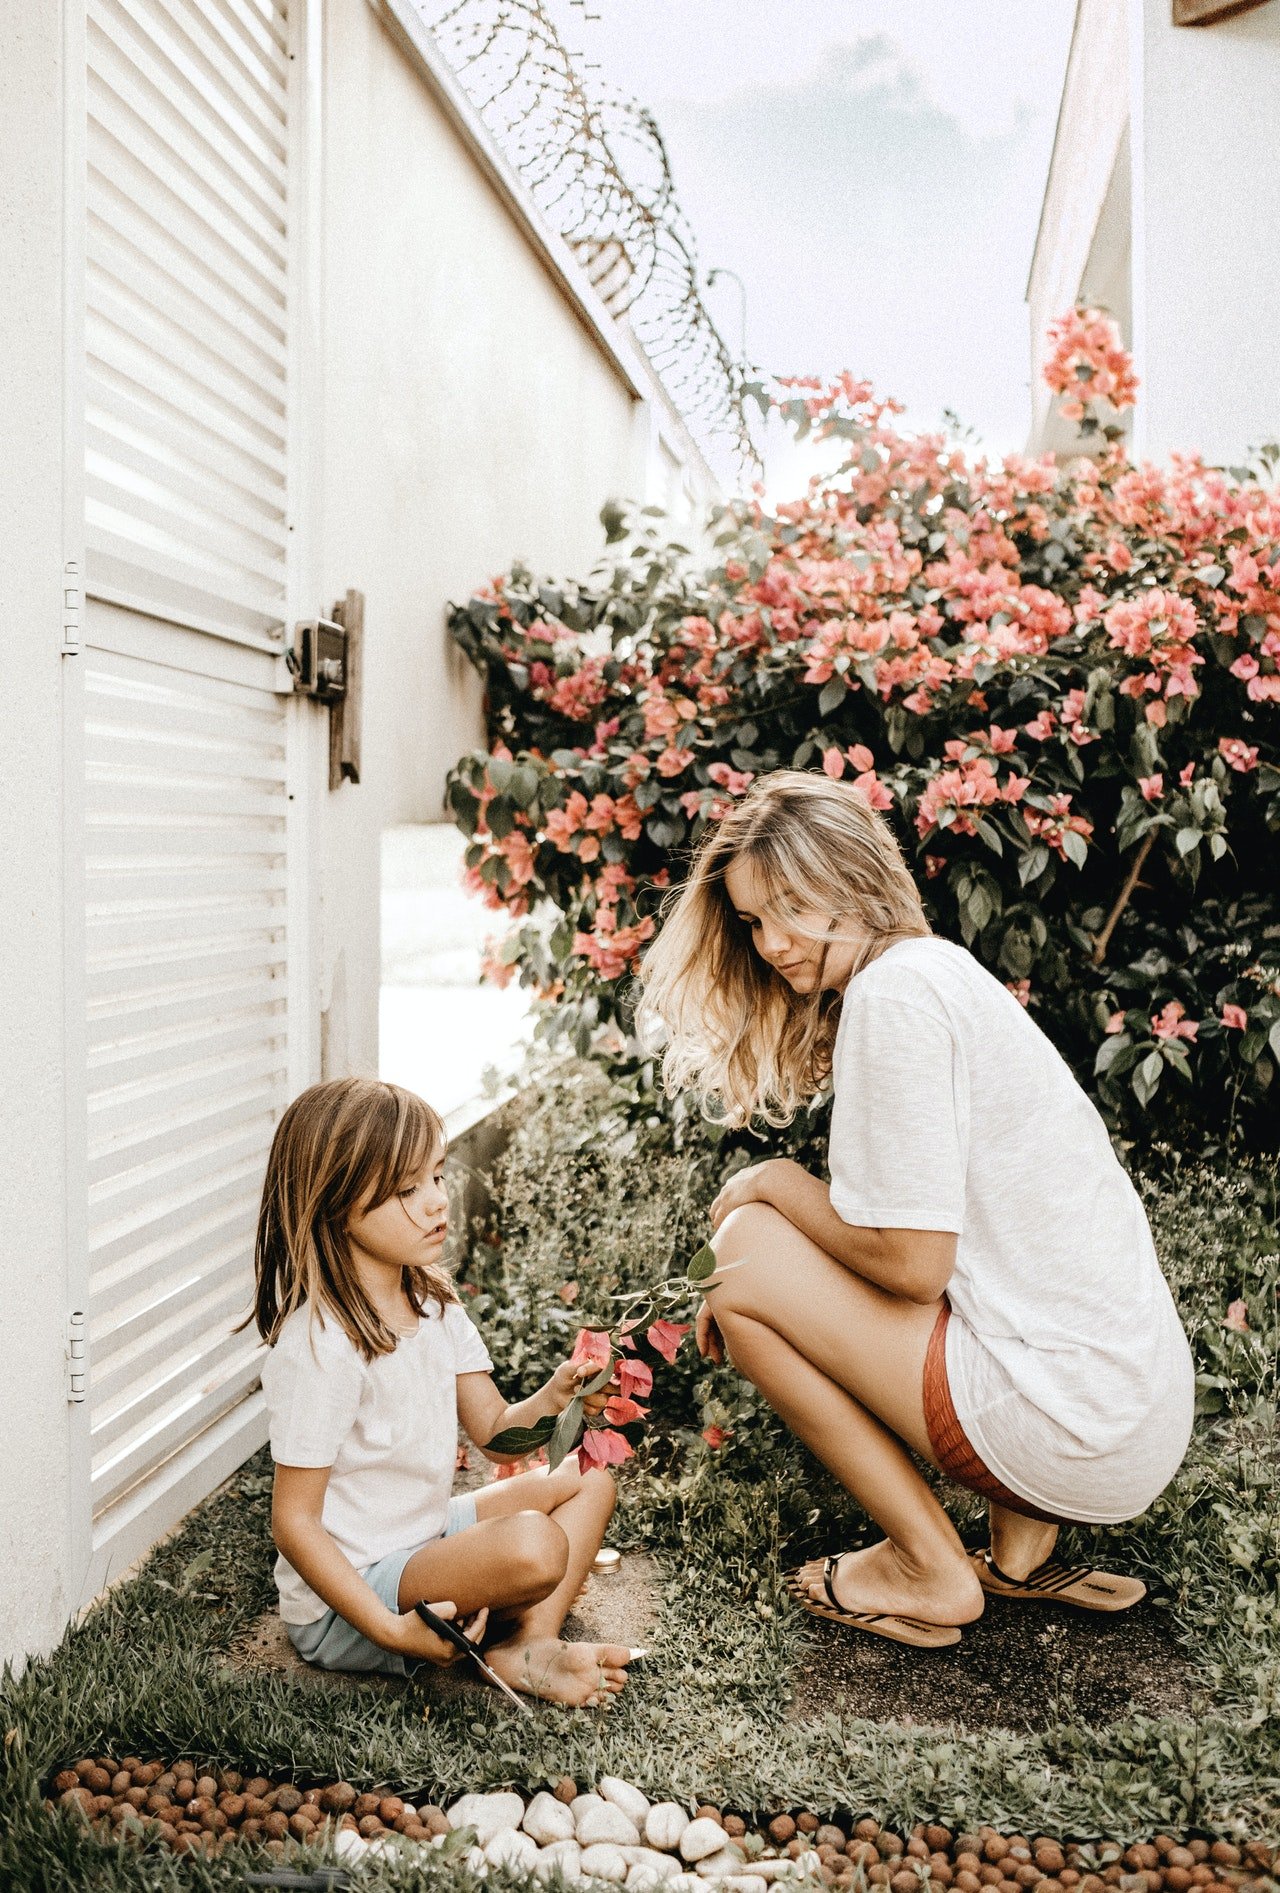 Woman and her daughter spending time together | Photo: Pexels